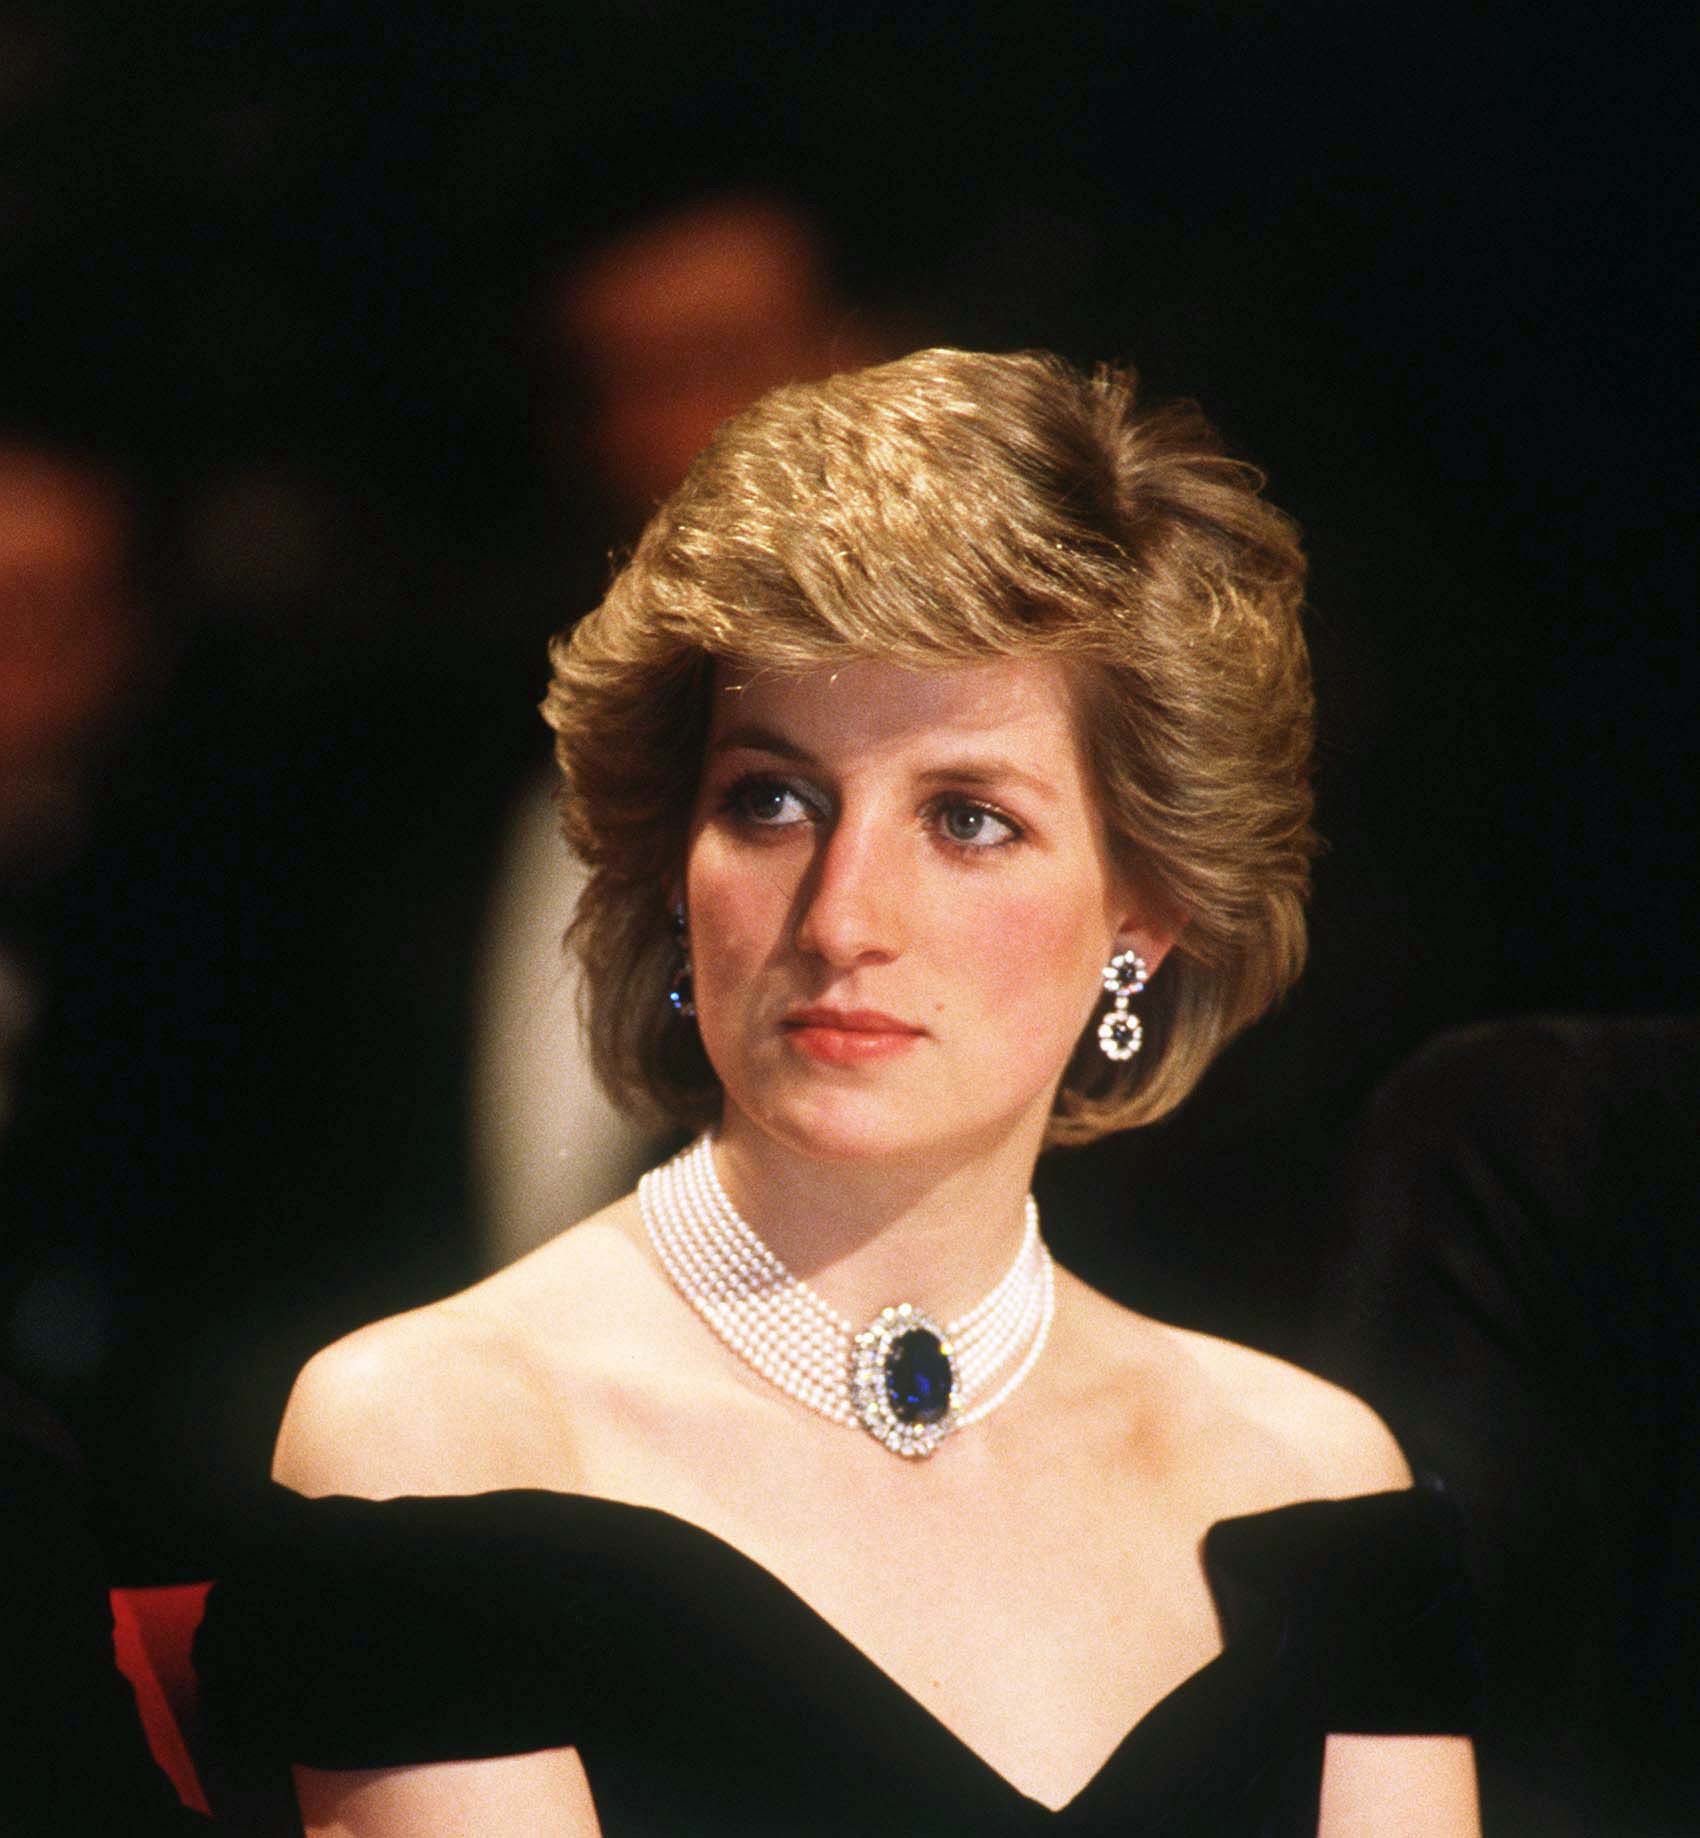 Diana, Princess of Wales, wearing a dress designed by Victor Edelstein at a state banquet in Vienna, Austria, on April 16, 1986 | Source: Getty Images